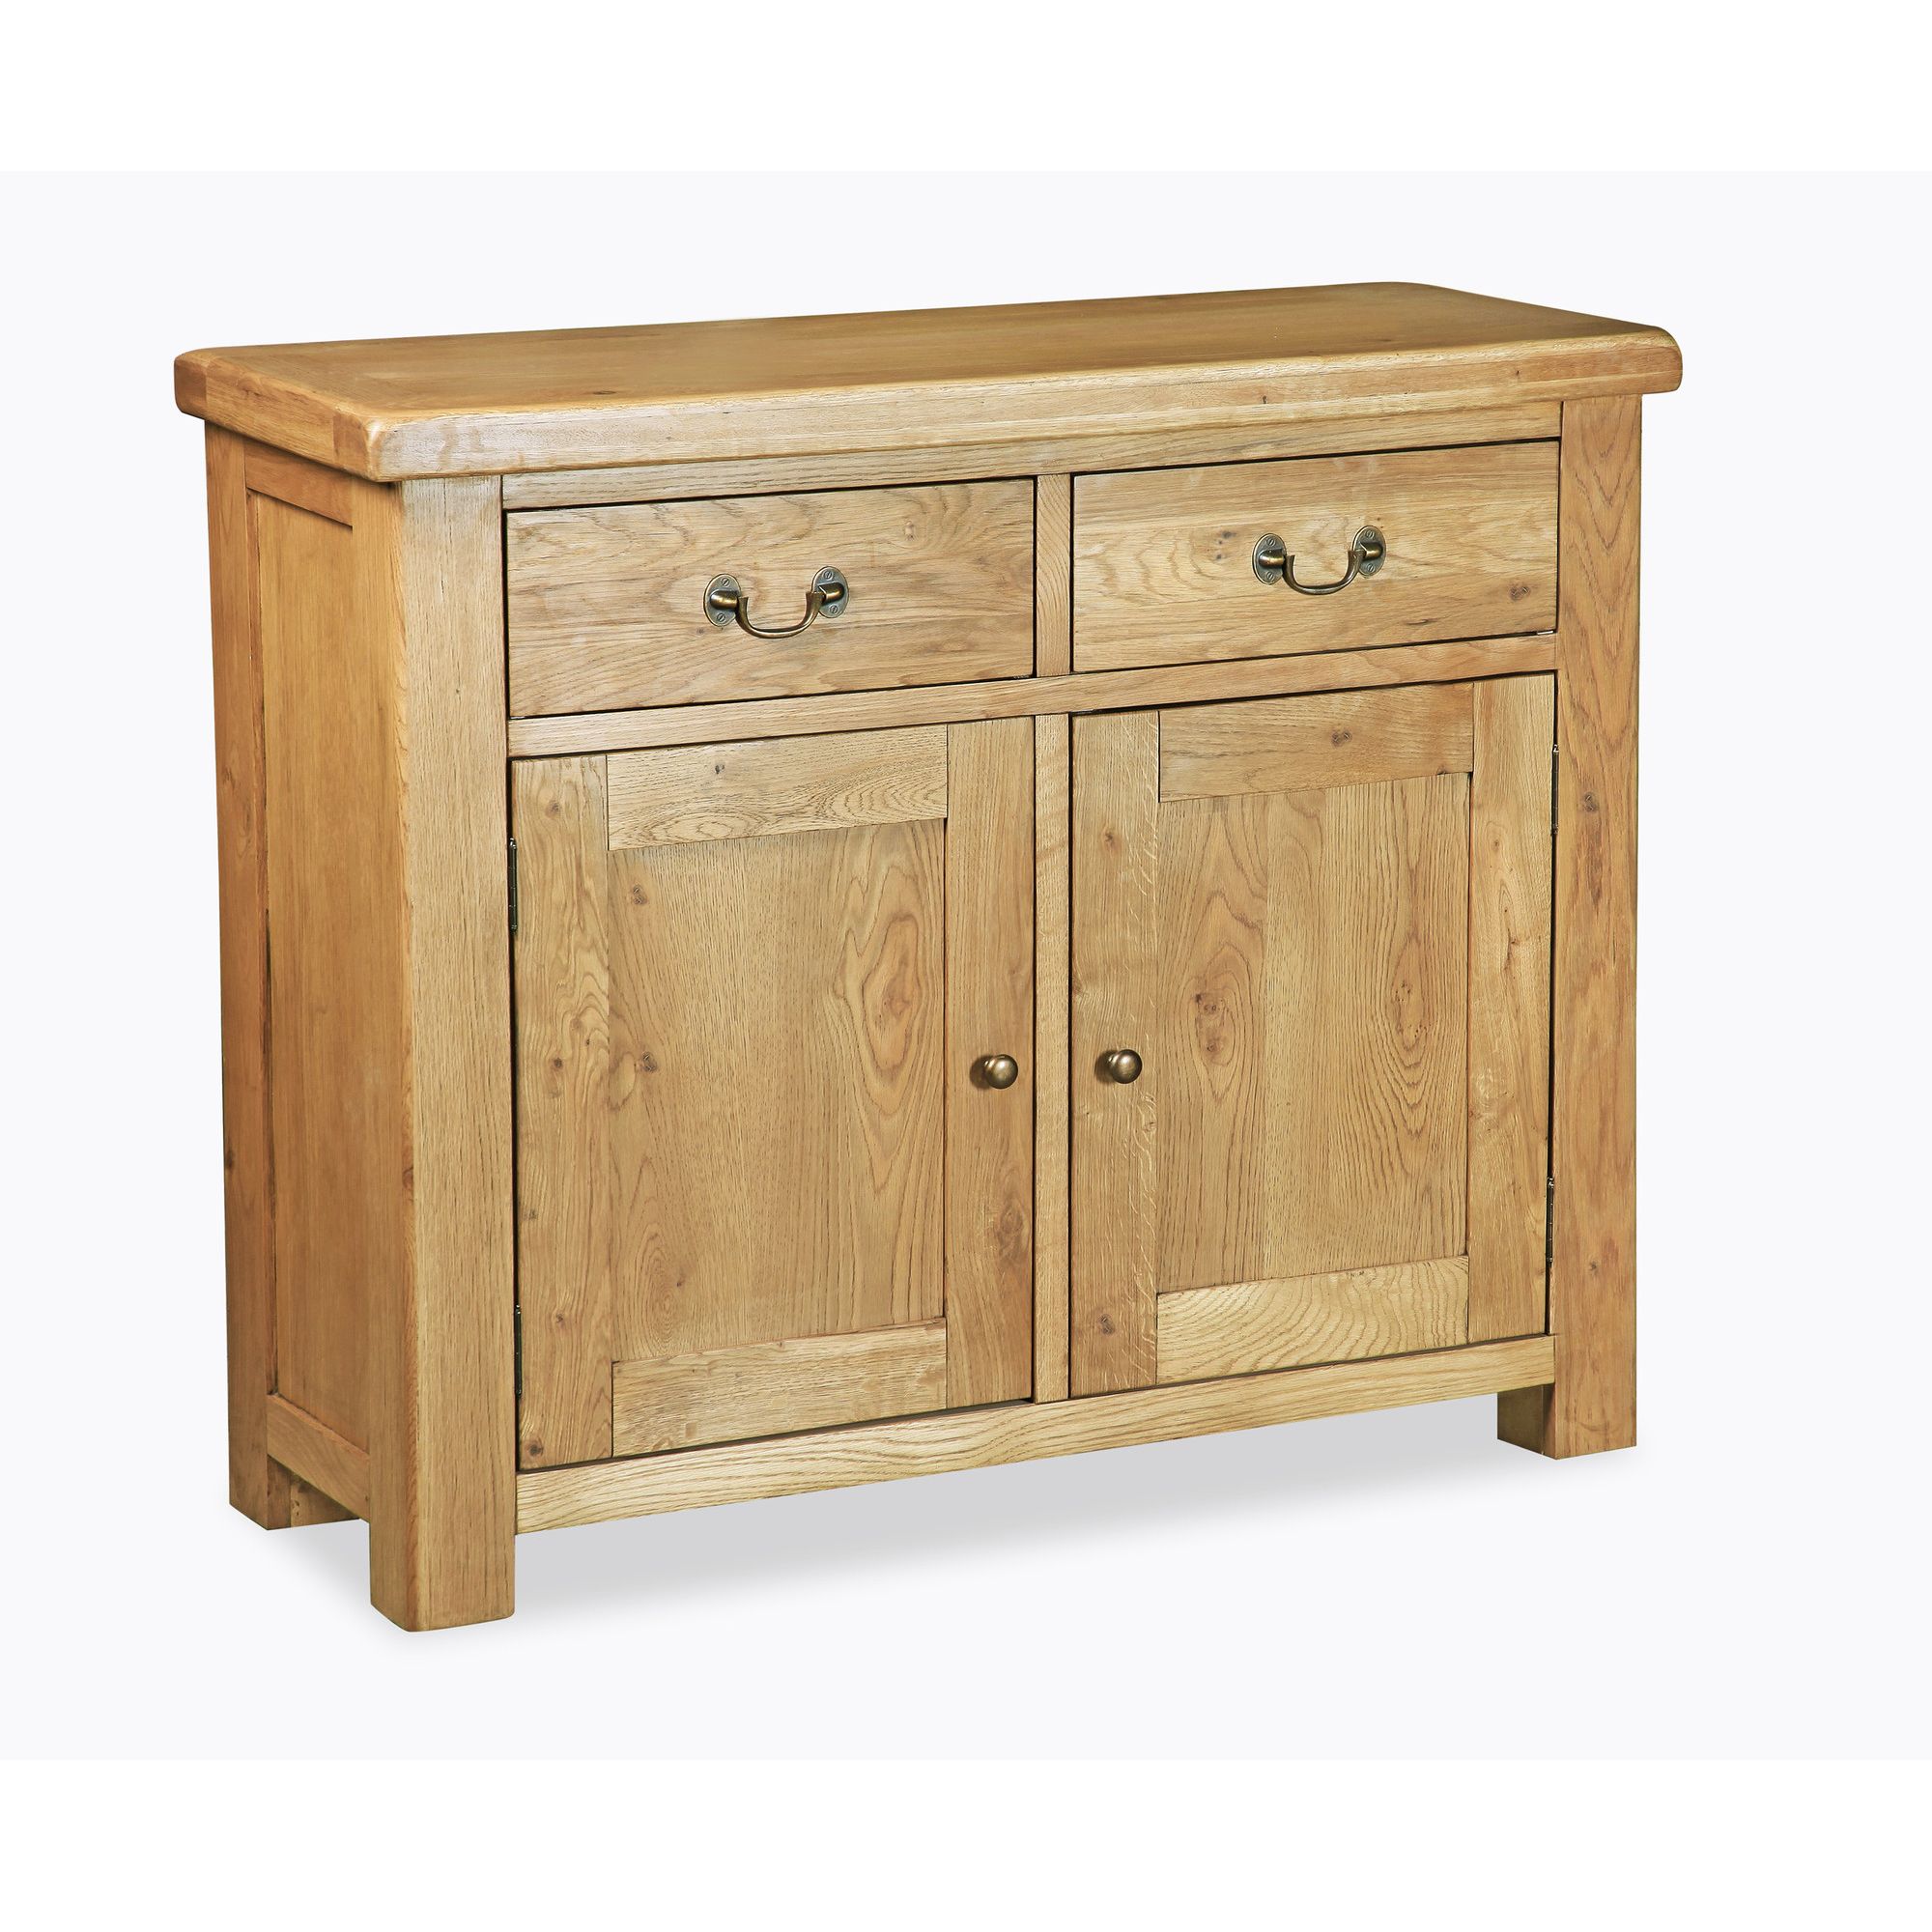 Alterton Furniture Amberley Sideboard - Small at Tesco Direct